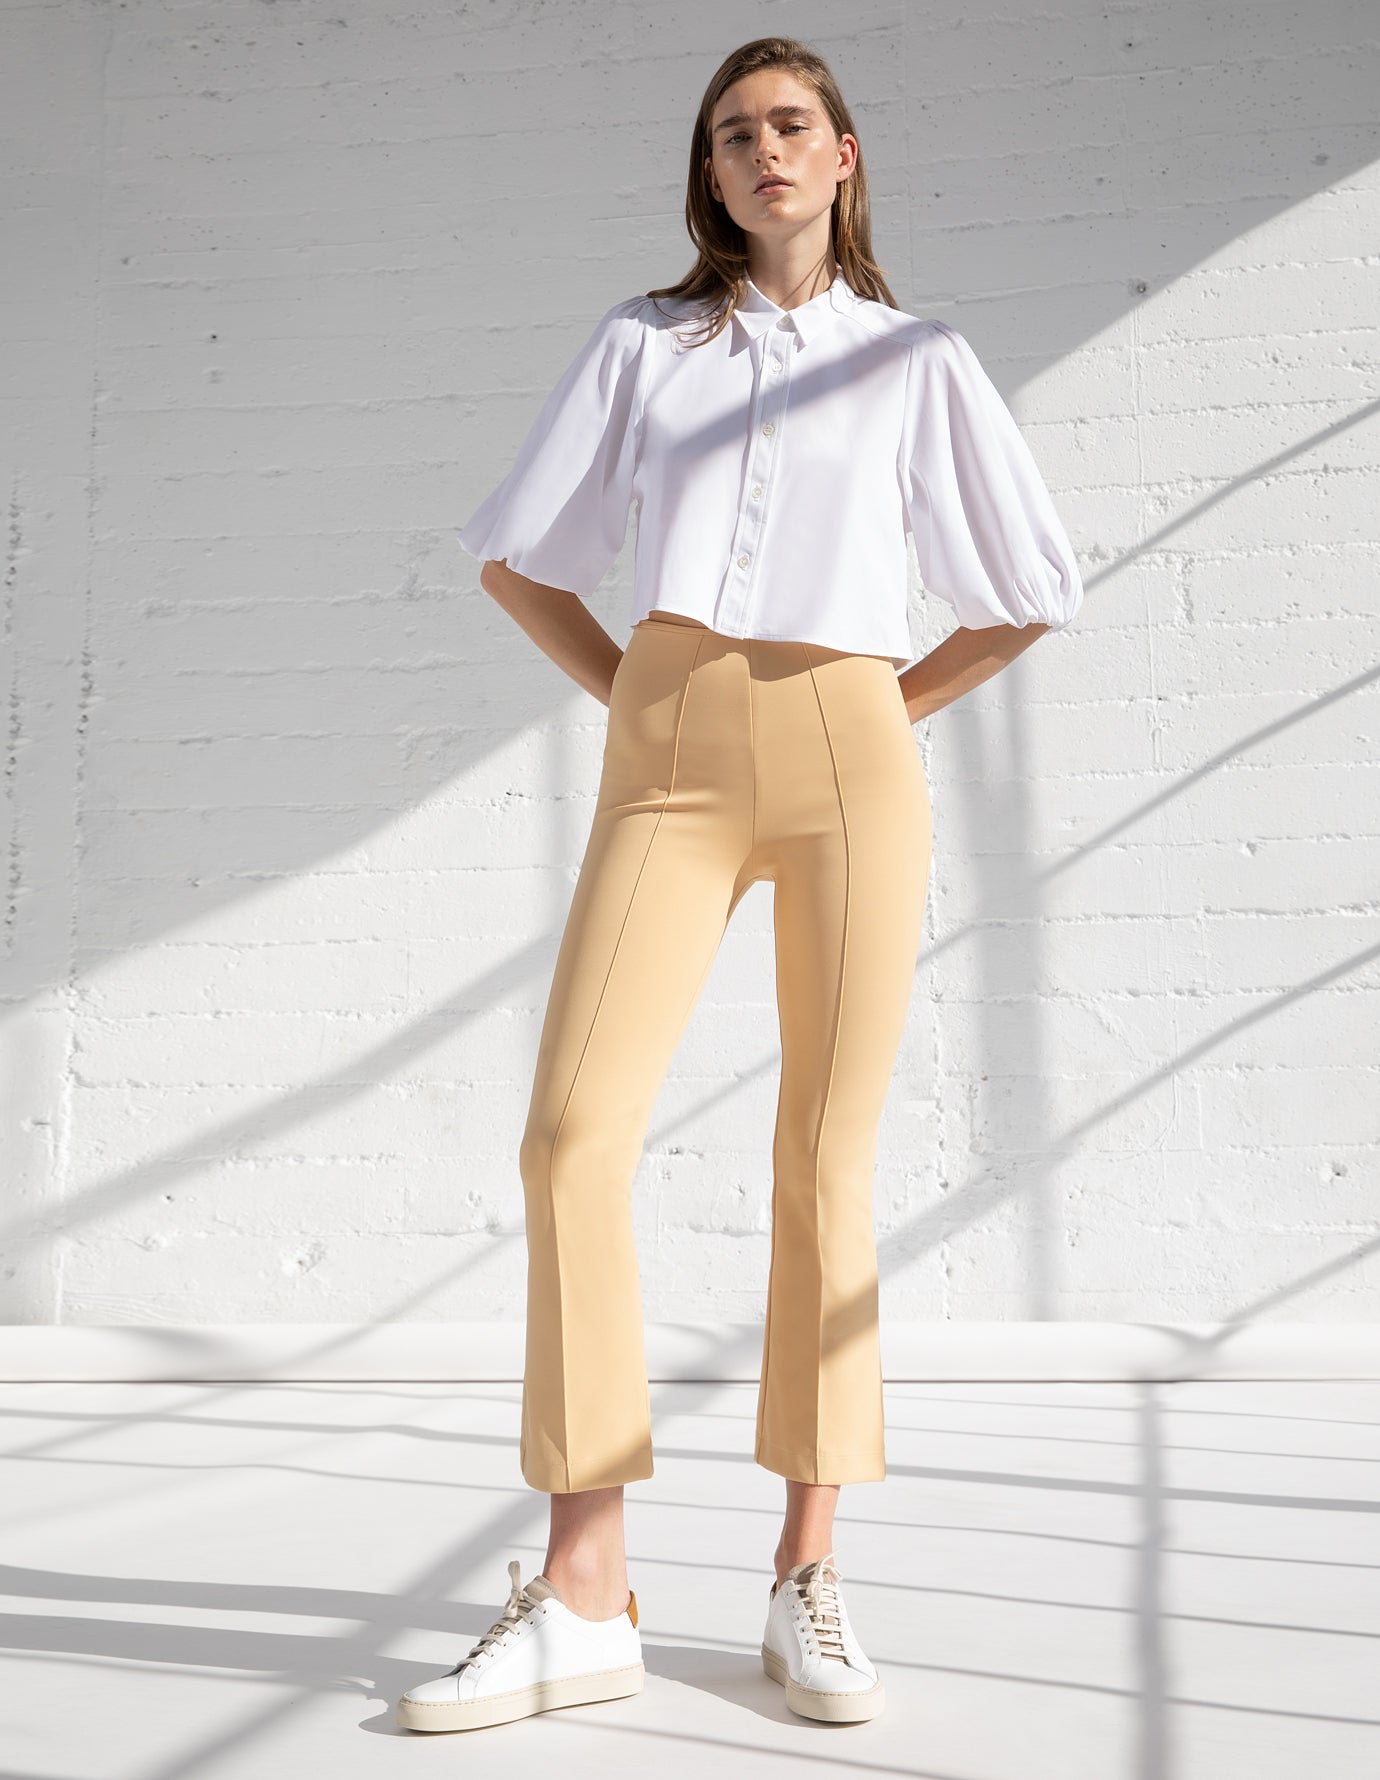 Adrianne Flare Pants - 2 colors to choose from